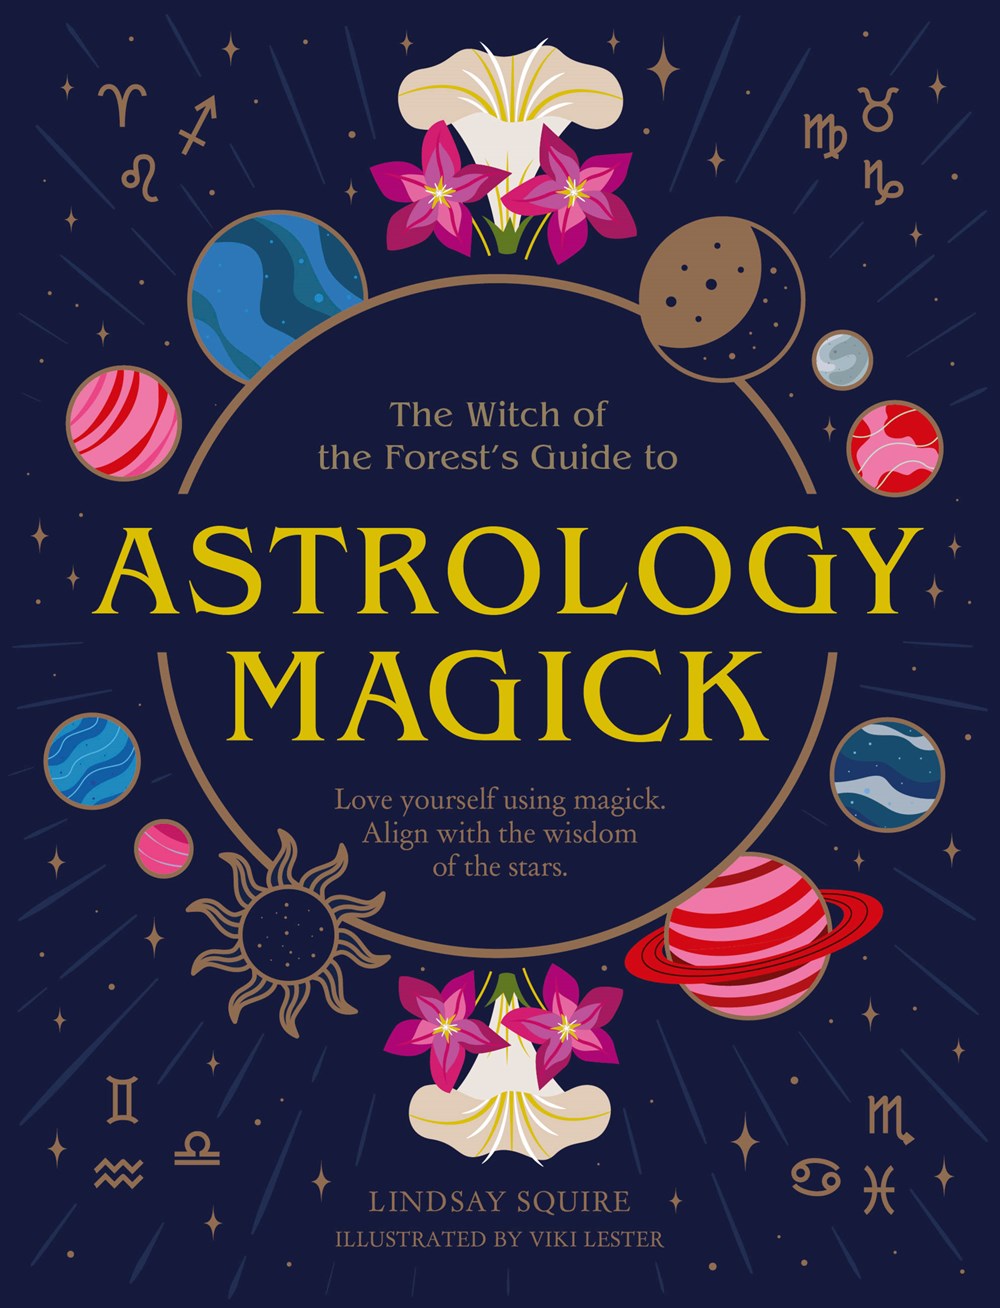 The Witch of the Forest's Guide to Astrology Magick